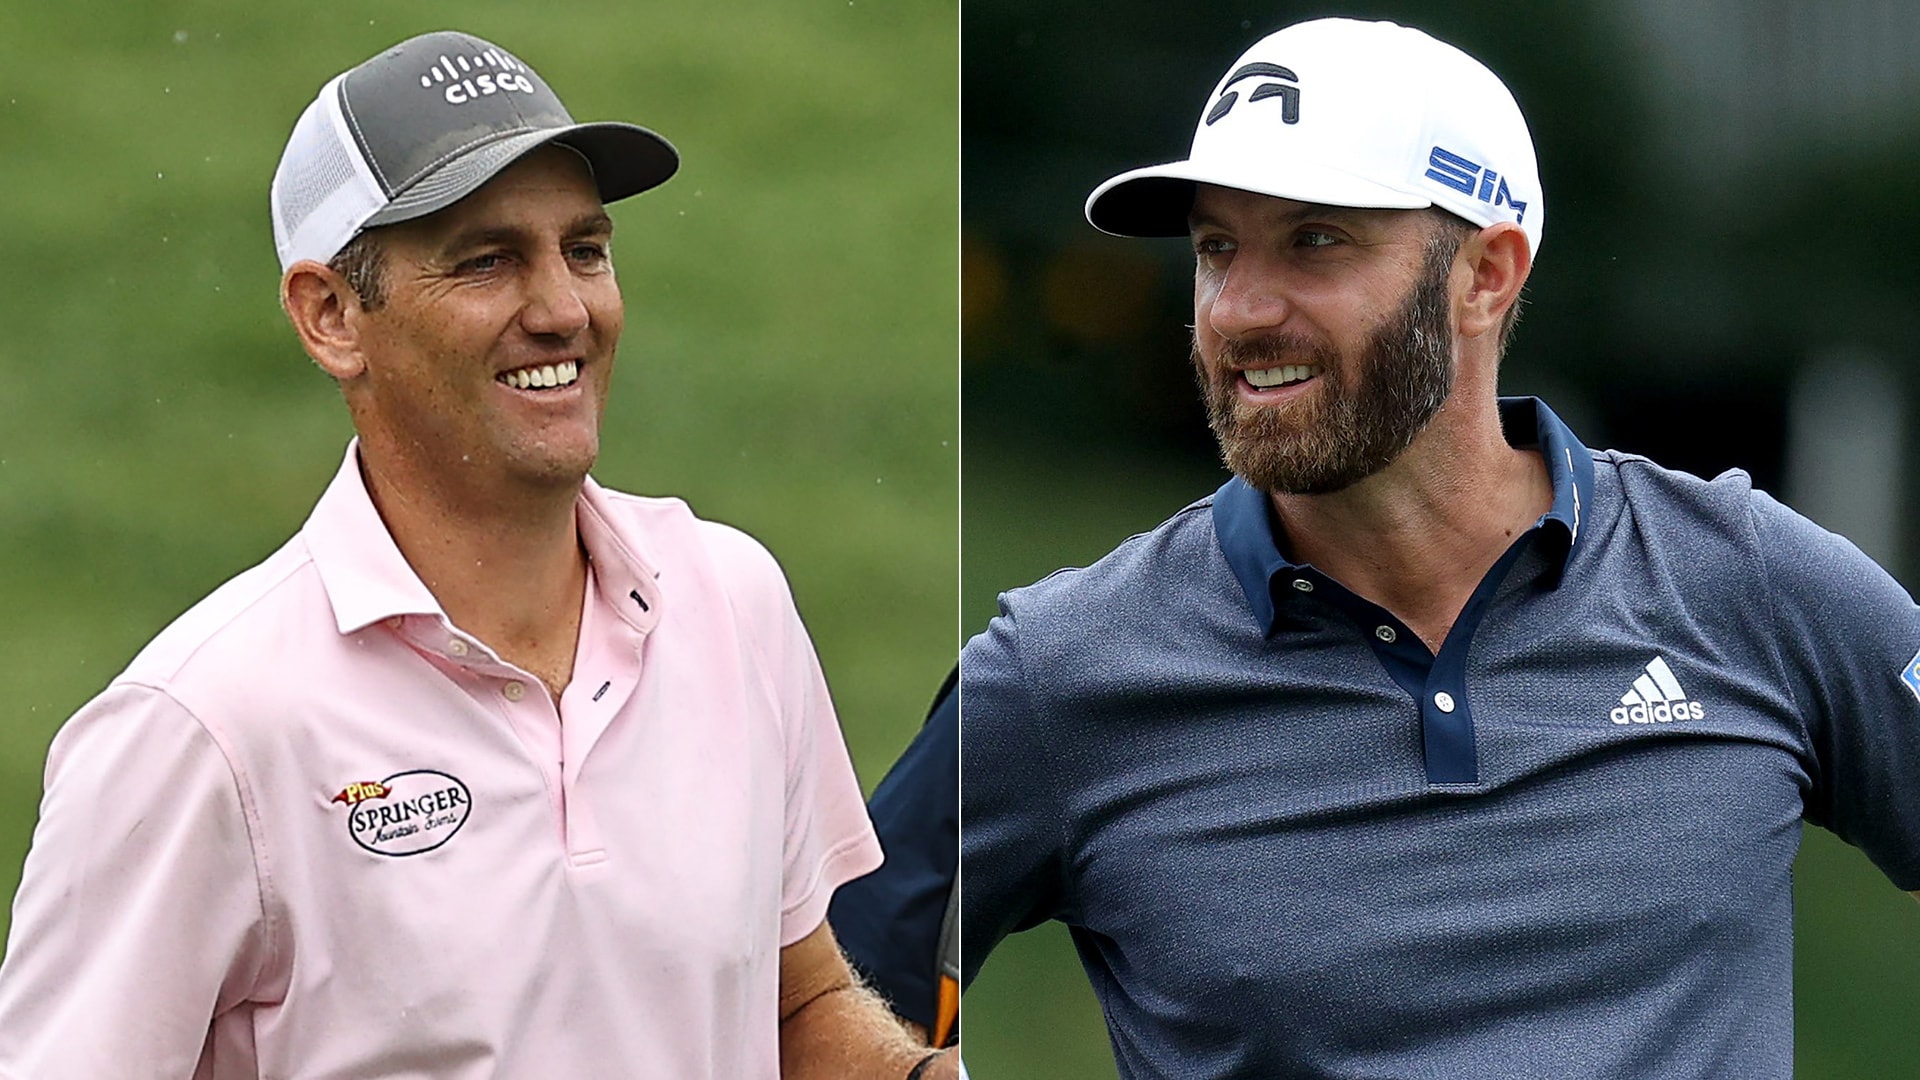 Brendon Todd leads Dustin Johnson by two after both sign for 61 at Travelers